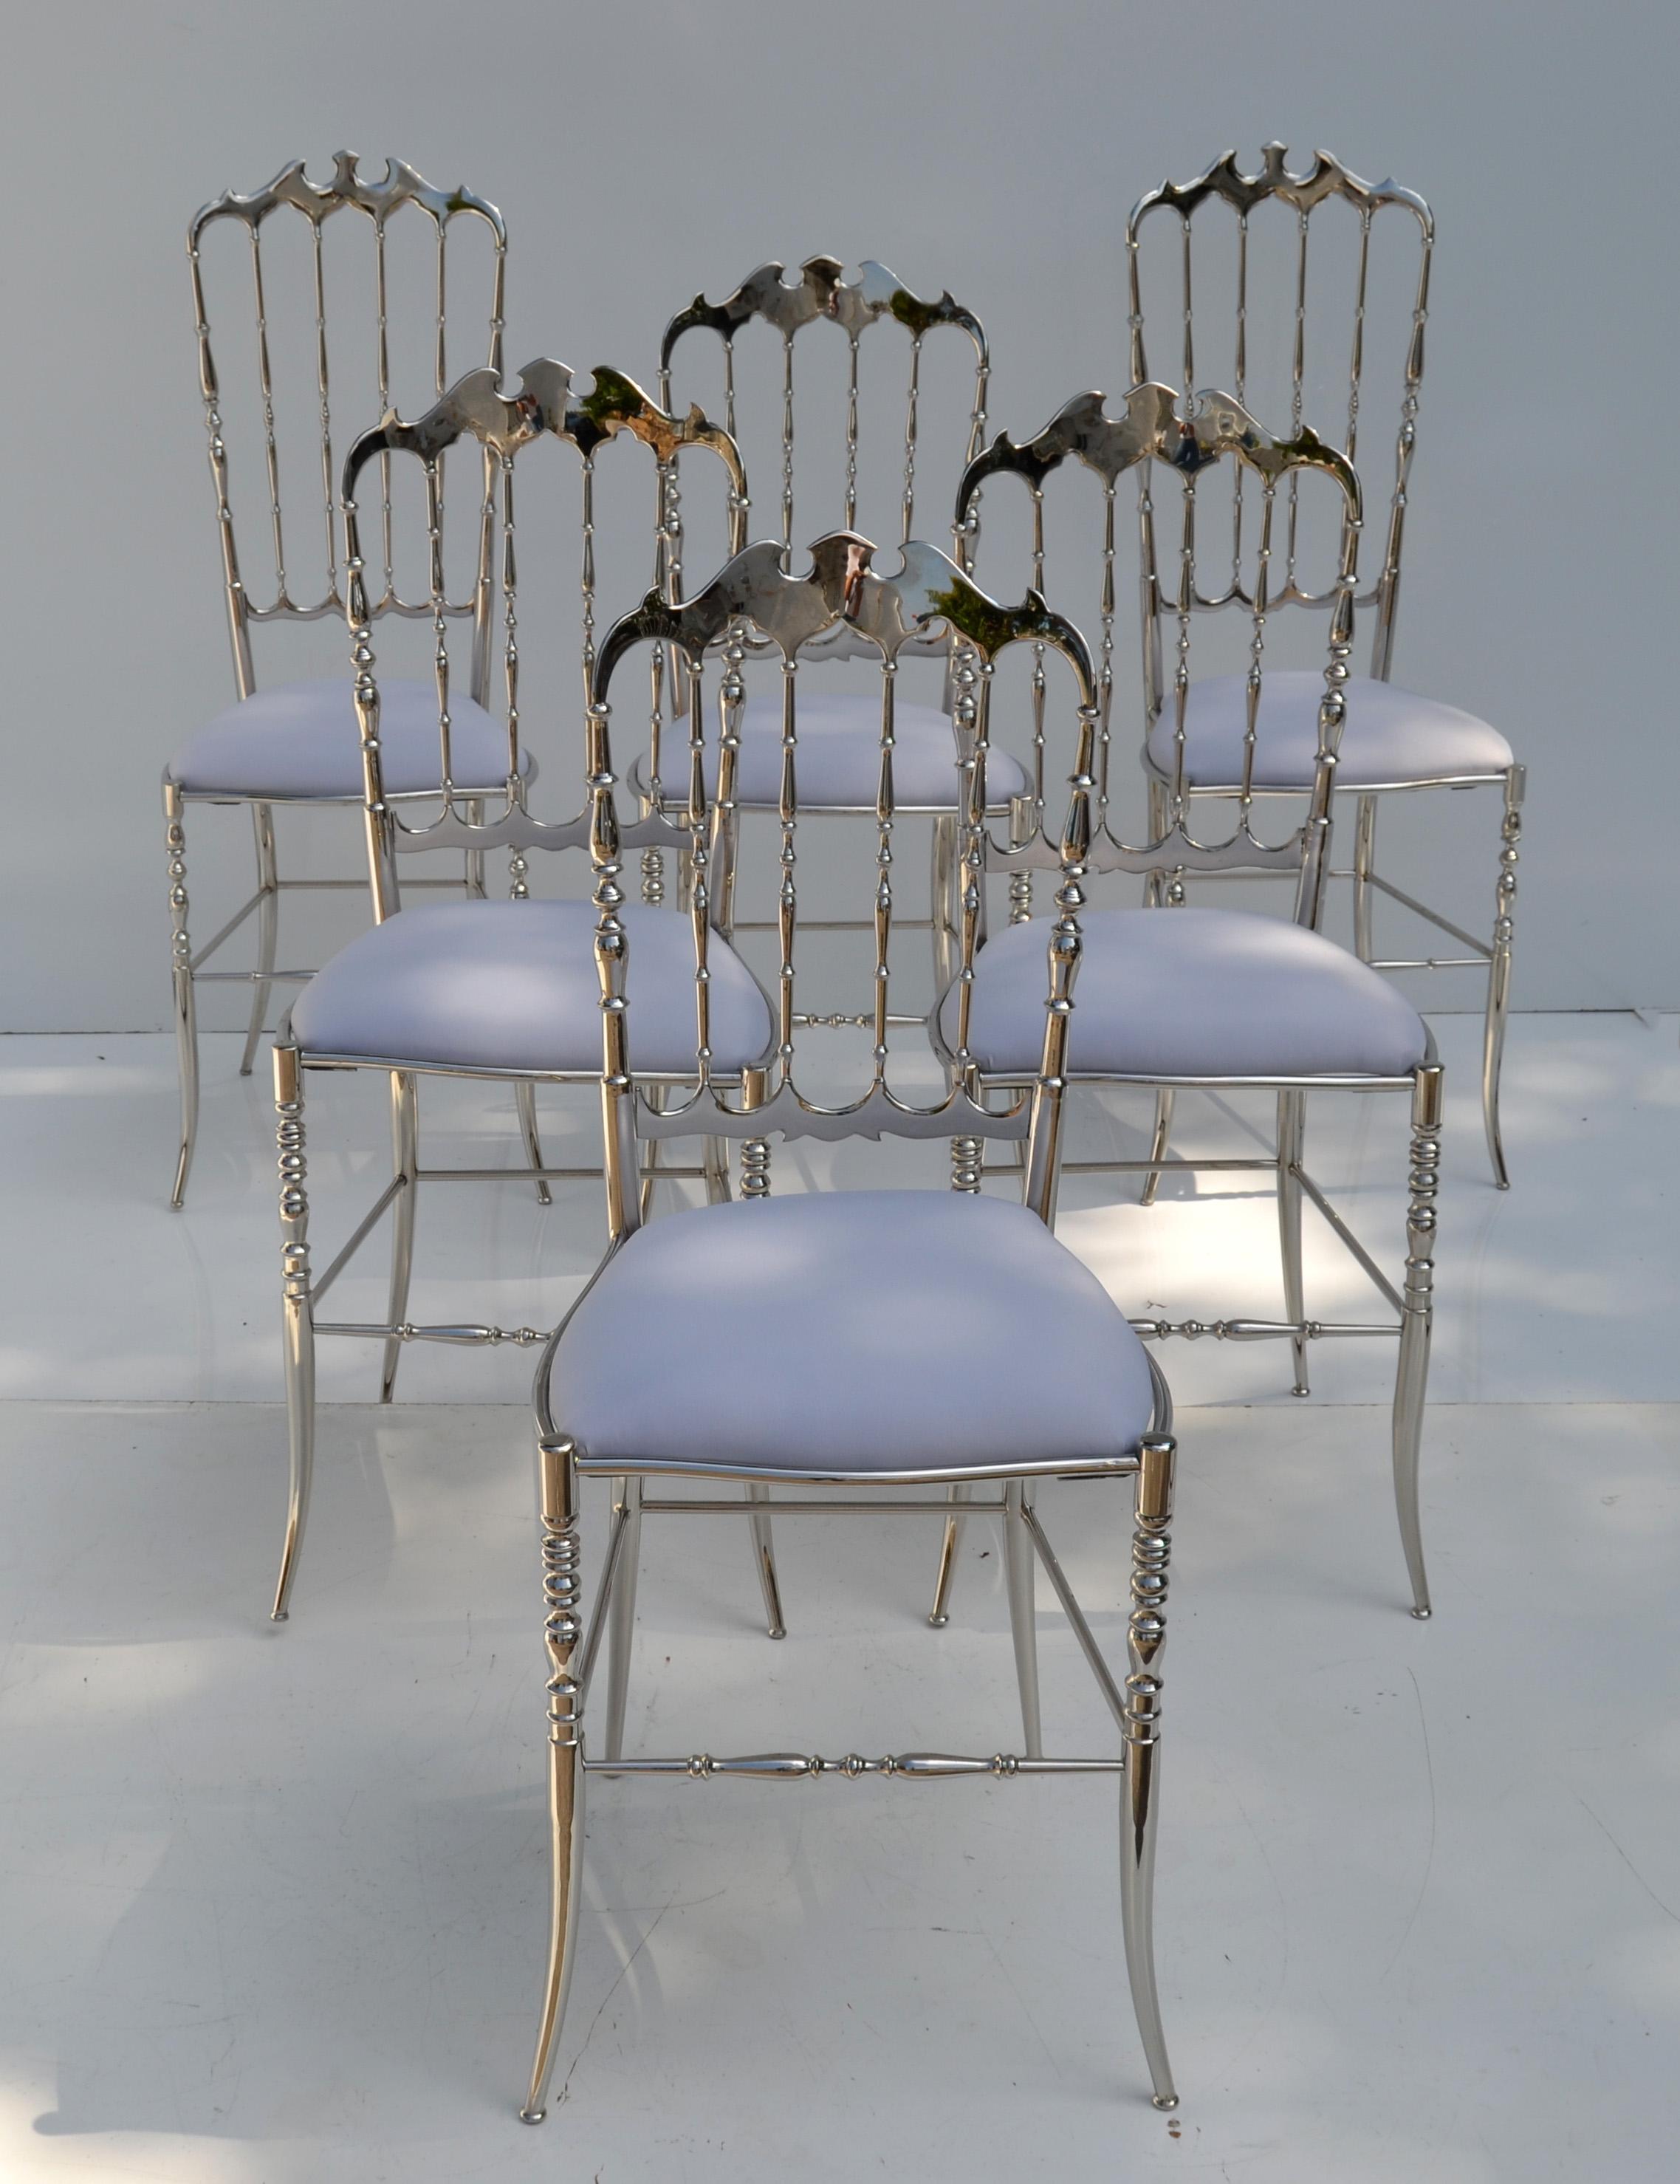 Maison Baccarat Crystal Room Restaurant Style Set of 6 Nickel Plated Chair 8